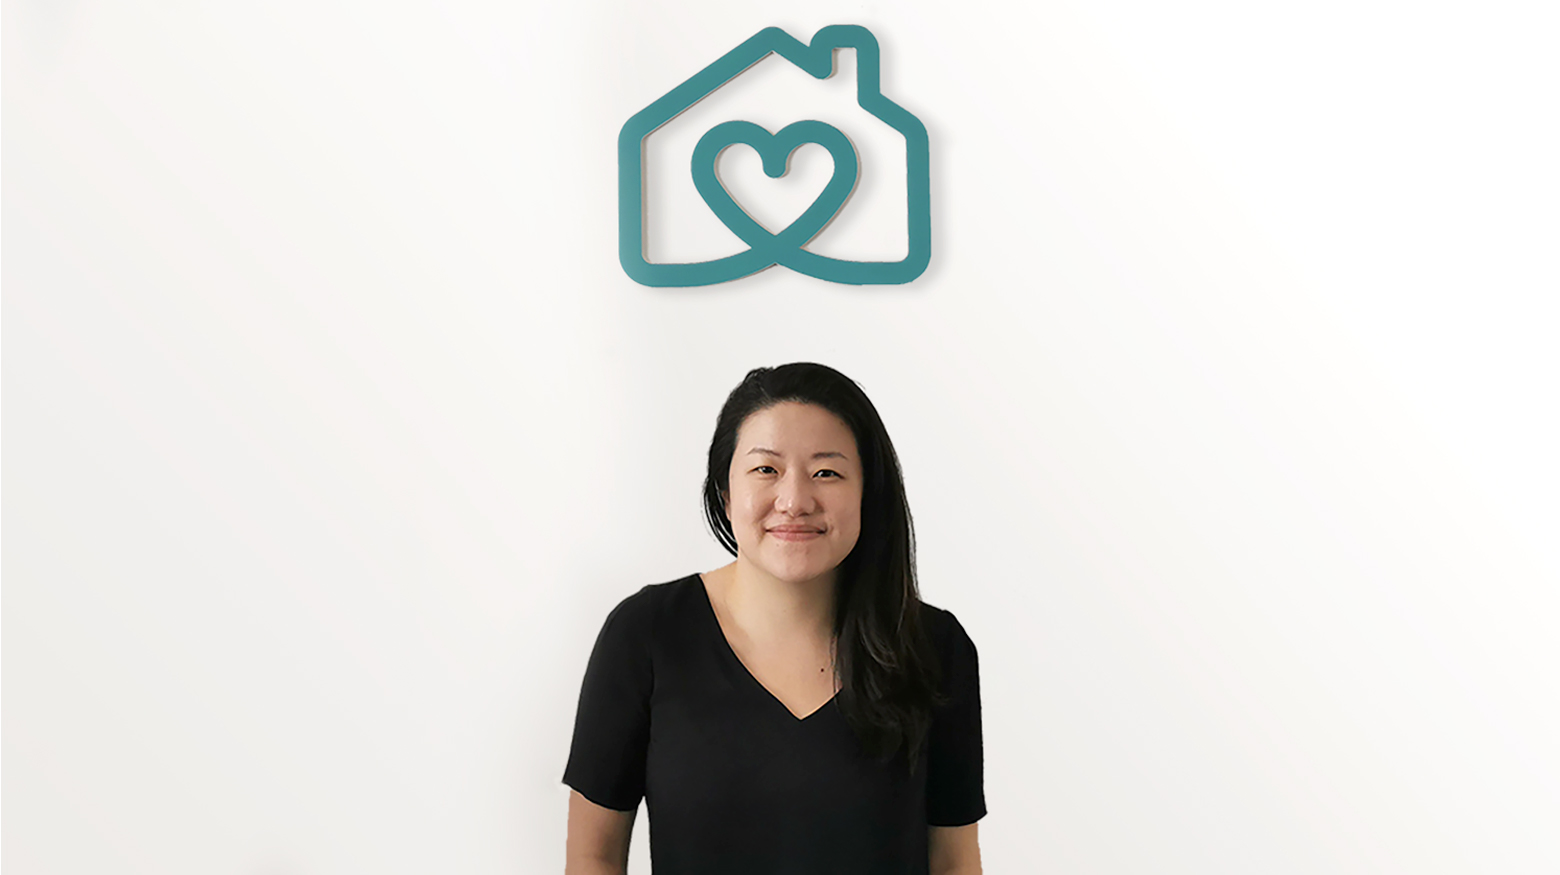 Technopreneur Gillian Tee uses her background in technology to build Homage, an app to get expert home care by expert local caregivers, nurses, rehabilitation therapists and medical doctors. 